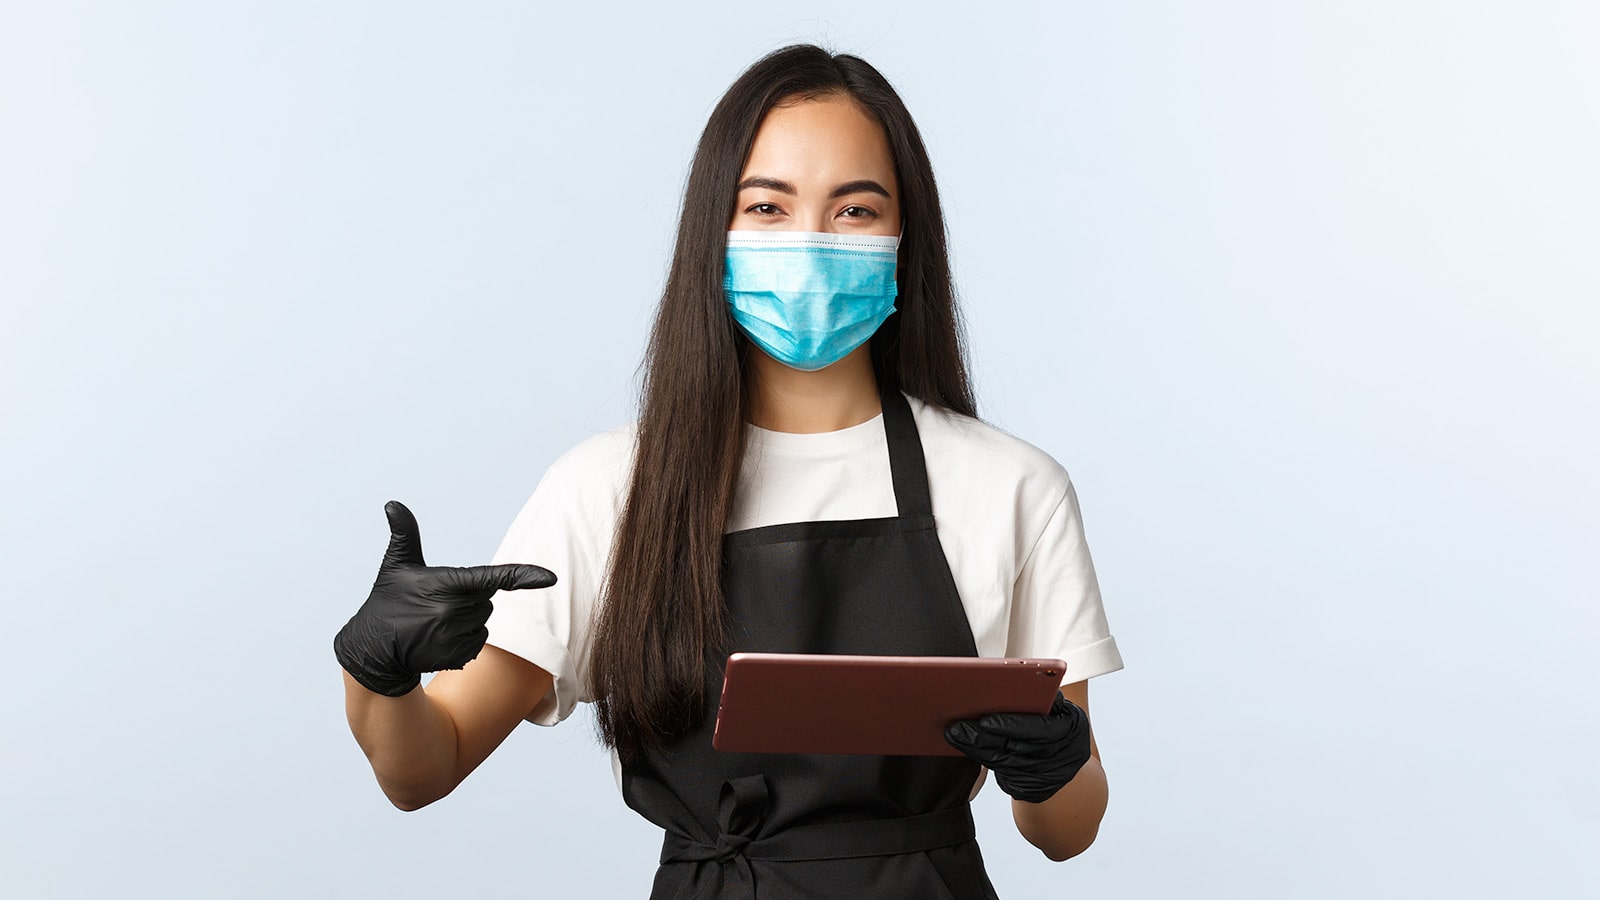 Young woman with long hair wearing face mask and apron wearing black glove and holding a tablet